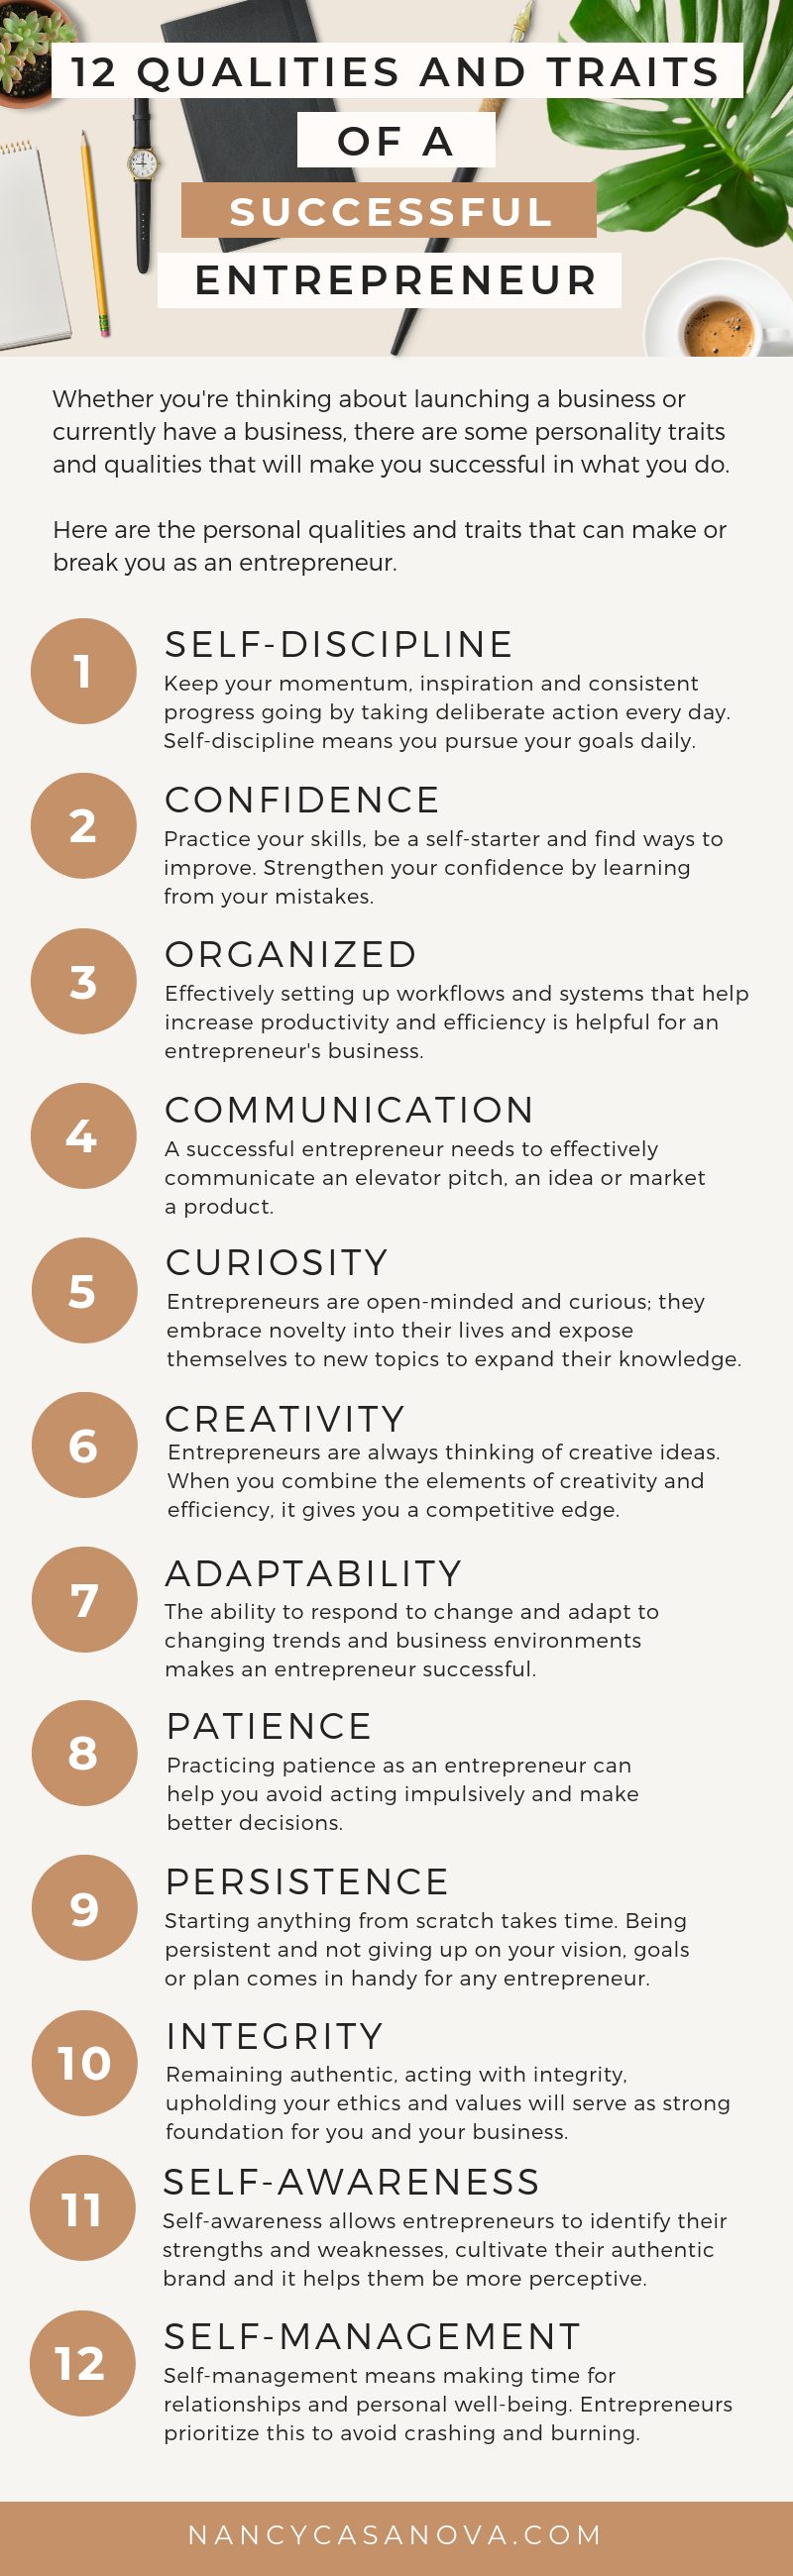 The 12 personal qualities and traits that can help make or break you as an entrepreneur. 